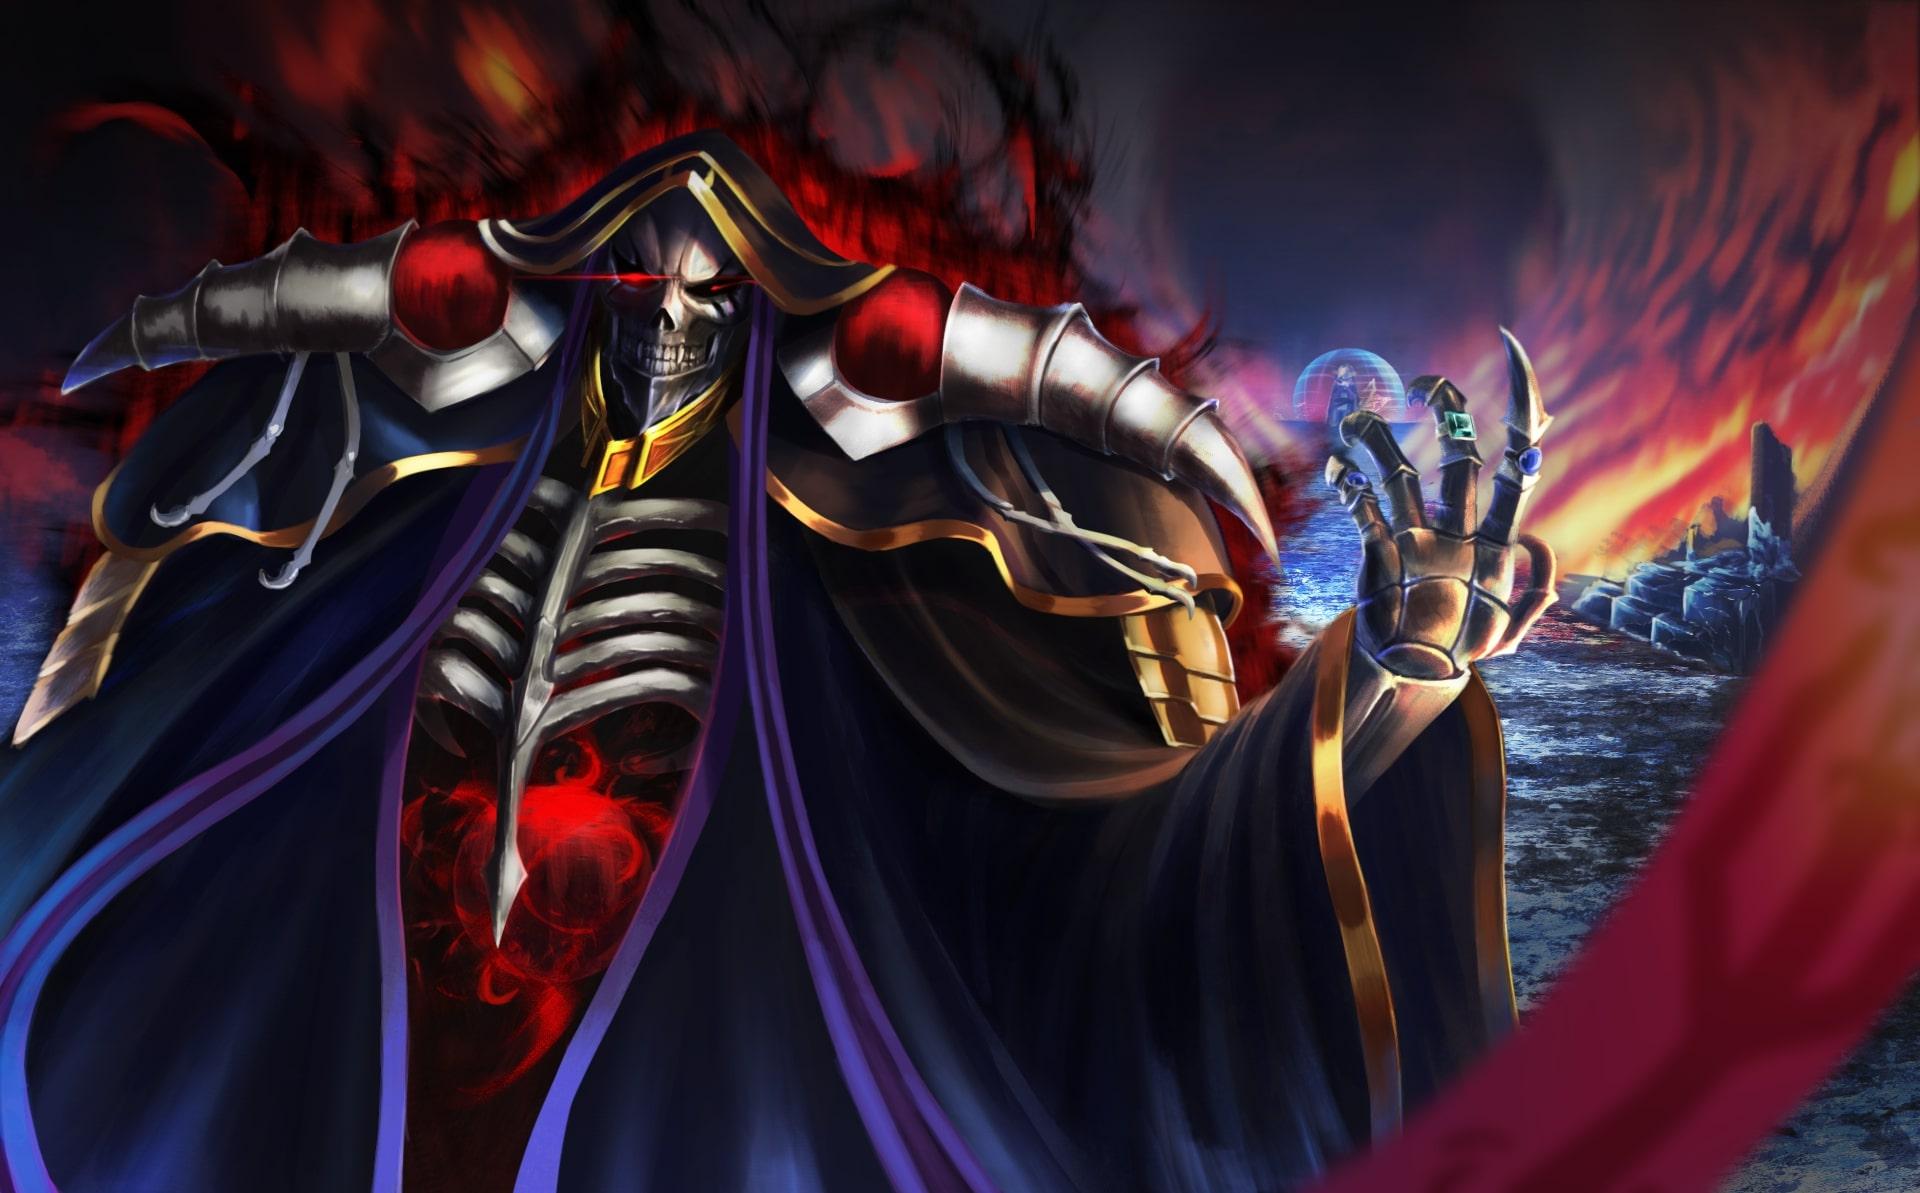 Wallpapers of Ainz Ooal Gown, Anime, Overlord backgrounds & HD image.